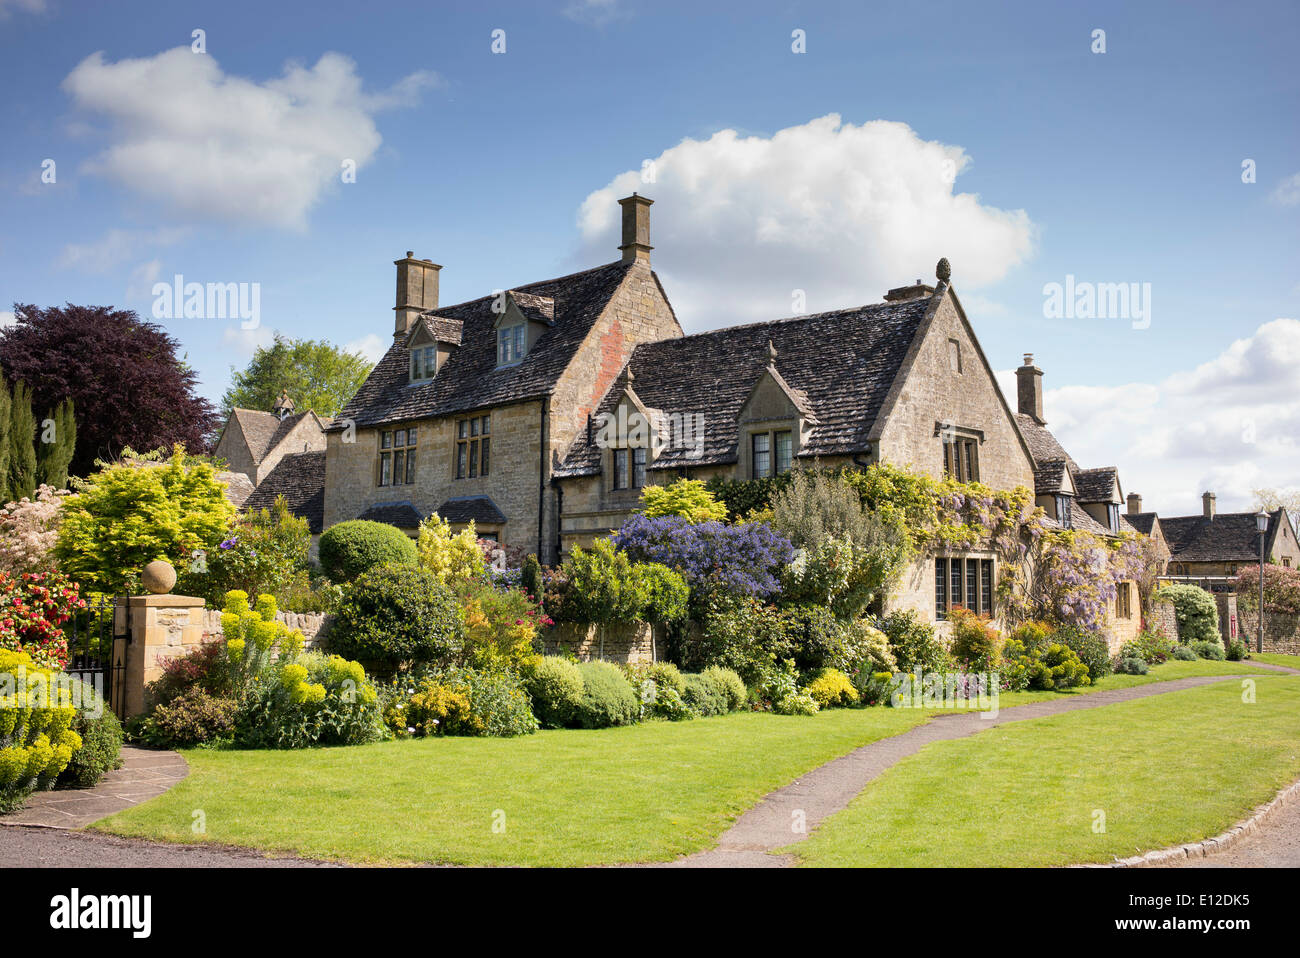 Cotswold Stone House in Chipping Campden, Cotswolds, Gloucestershire, England Stock Photo